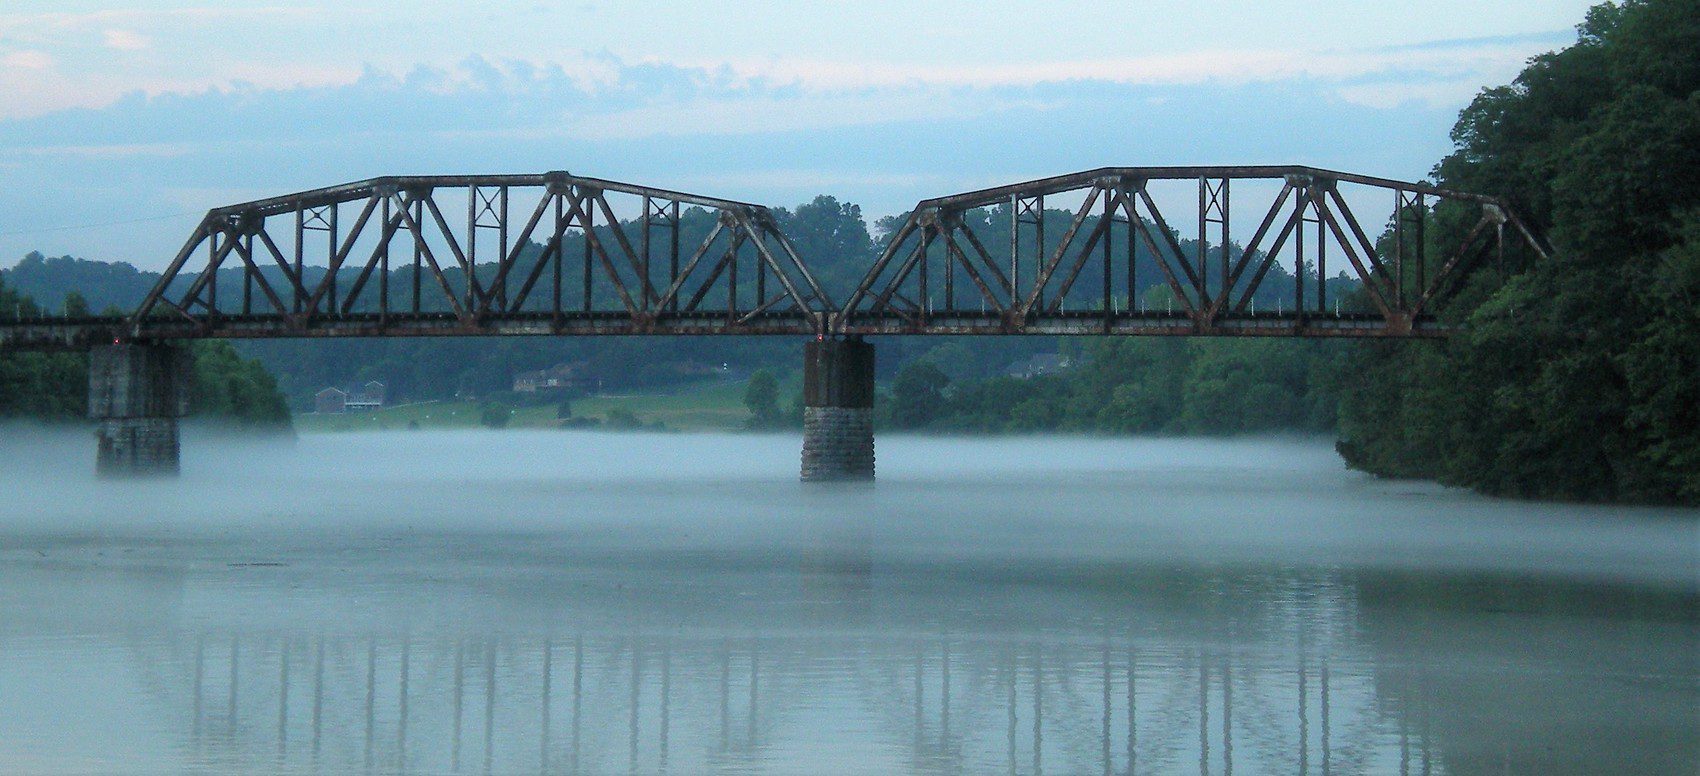 Virtual Travel: The TVA and the Clinch River